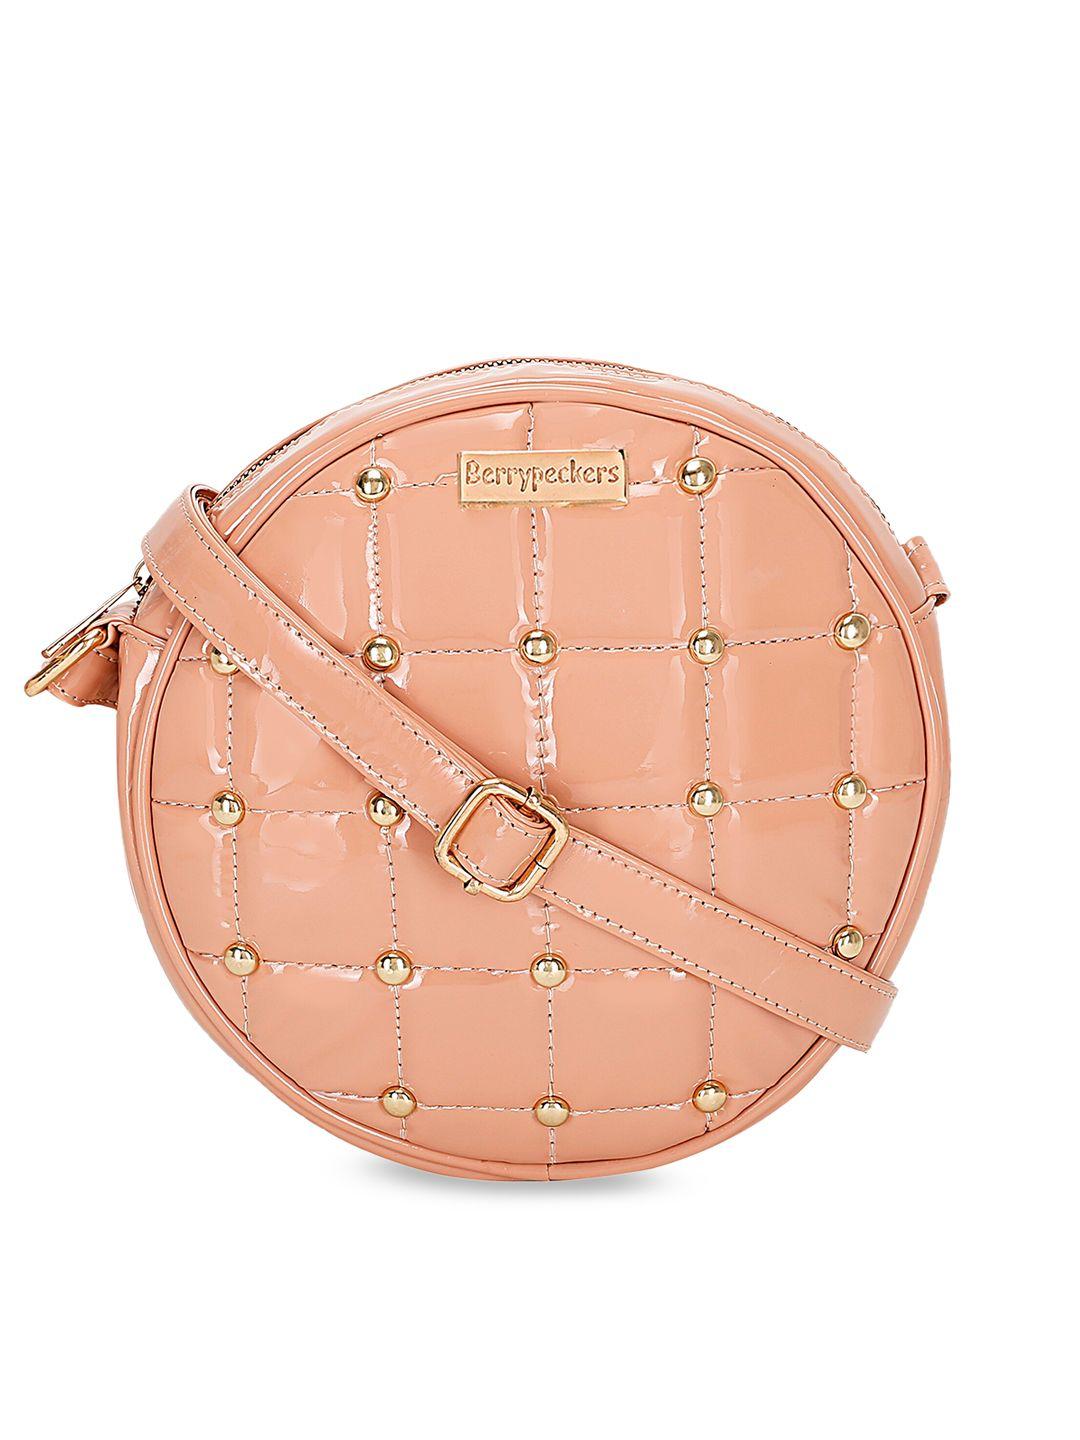 berrypeckers peach-coloured embellished structured sling bag